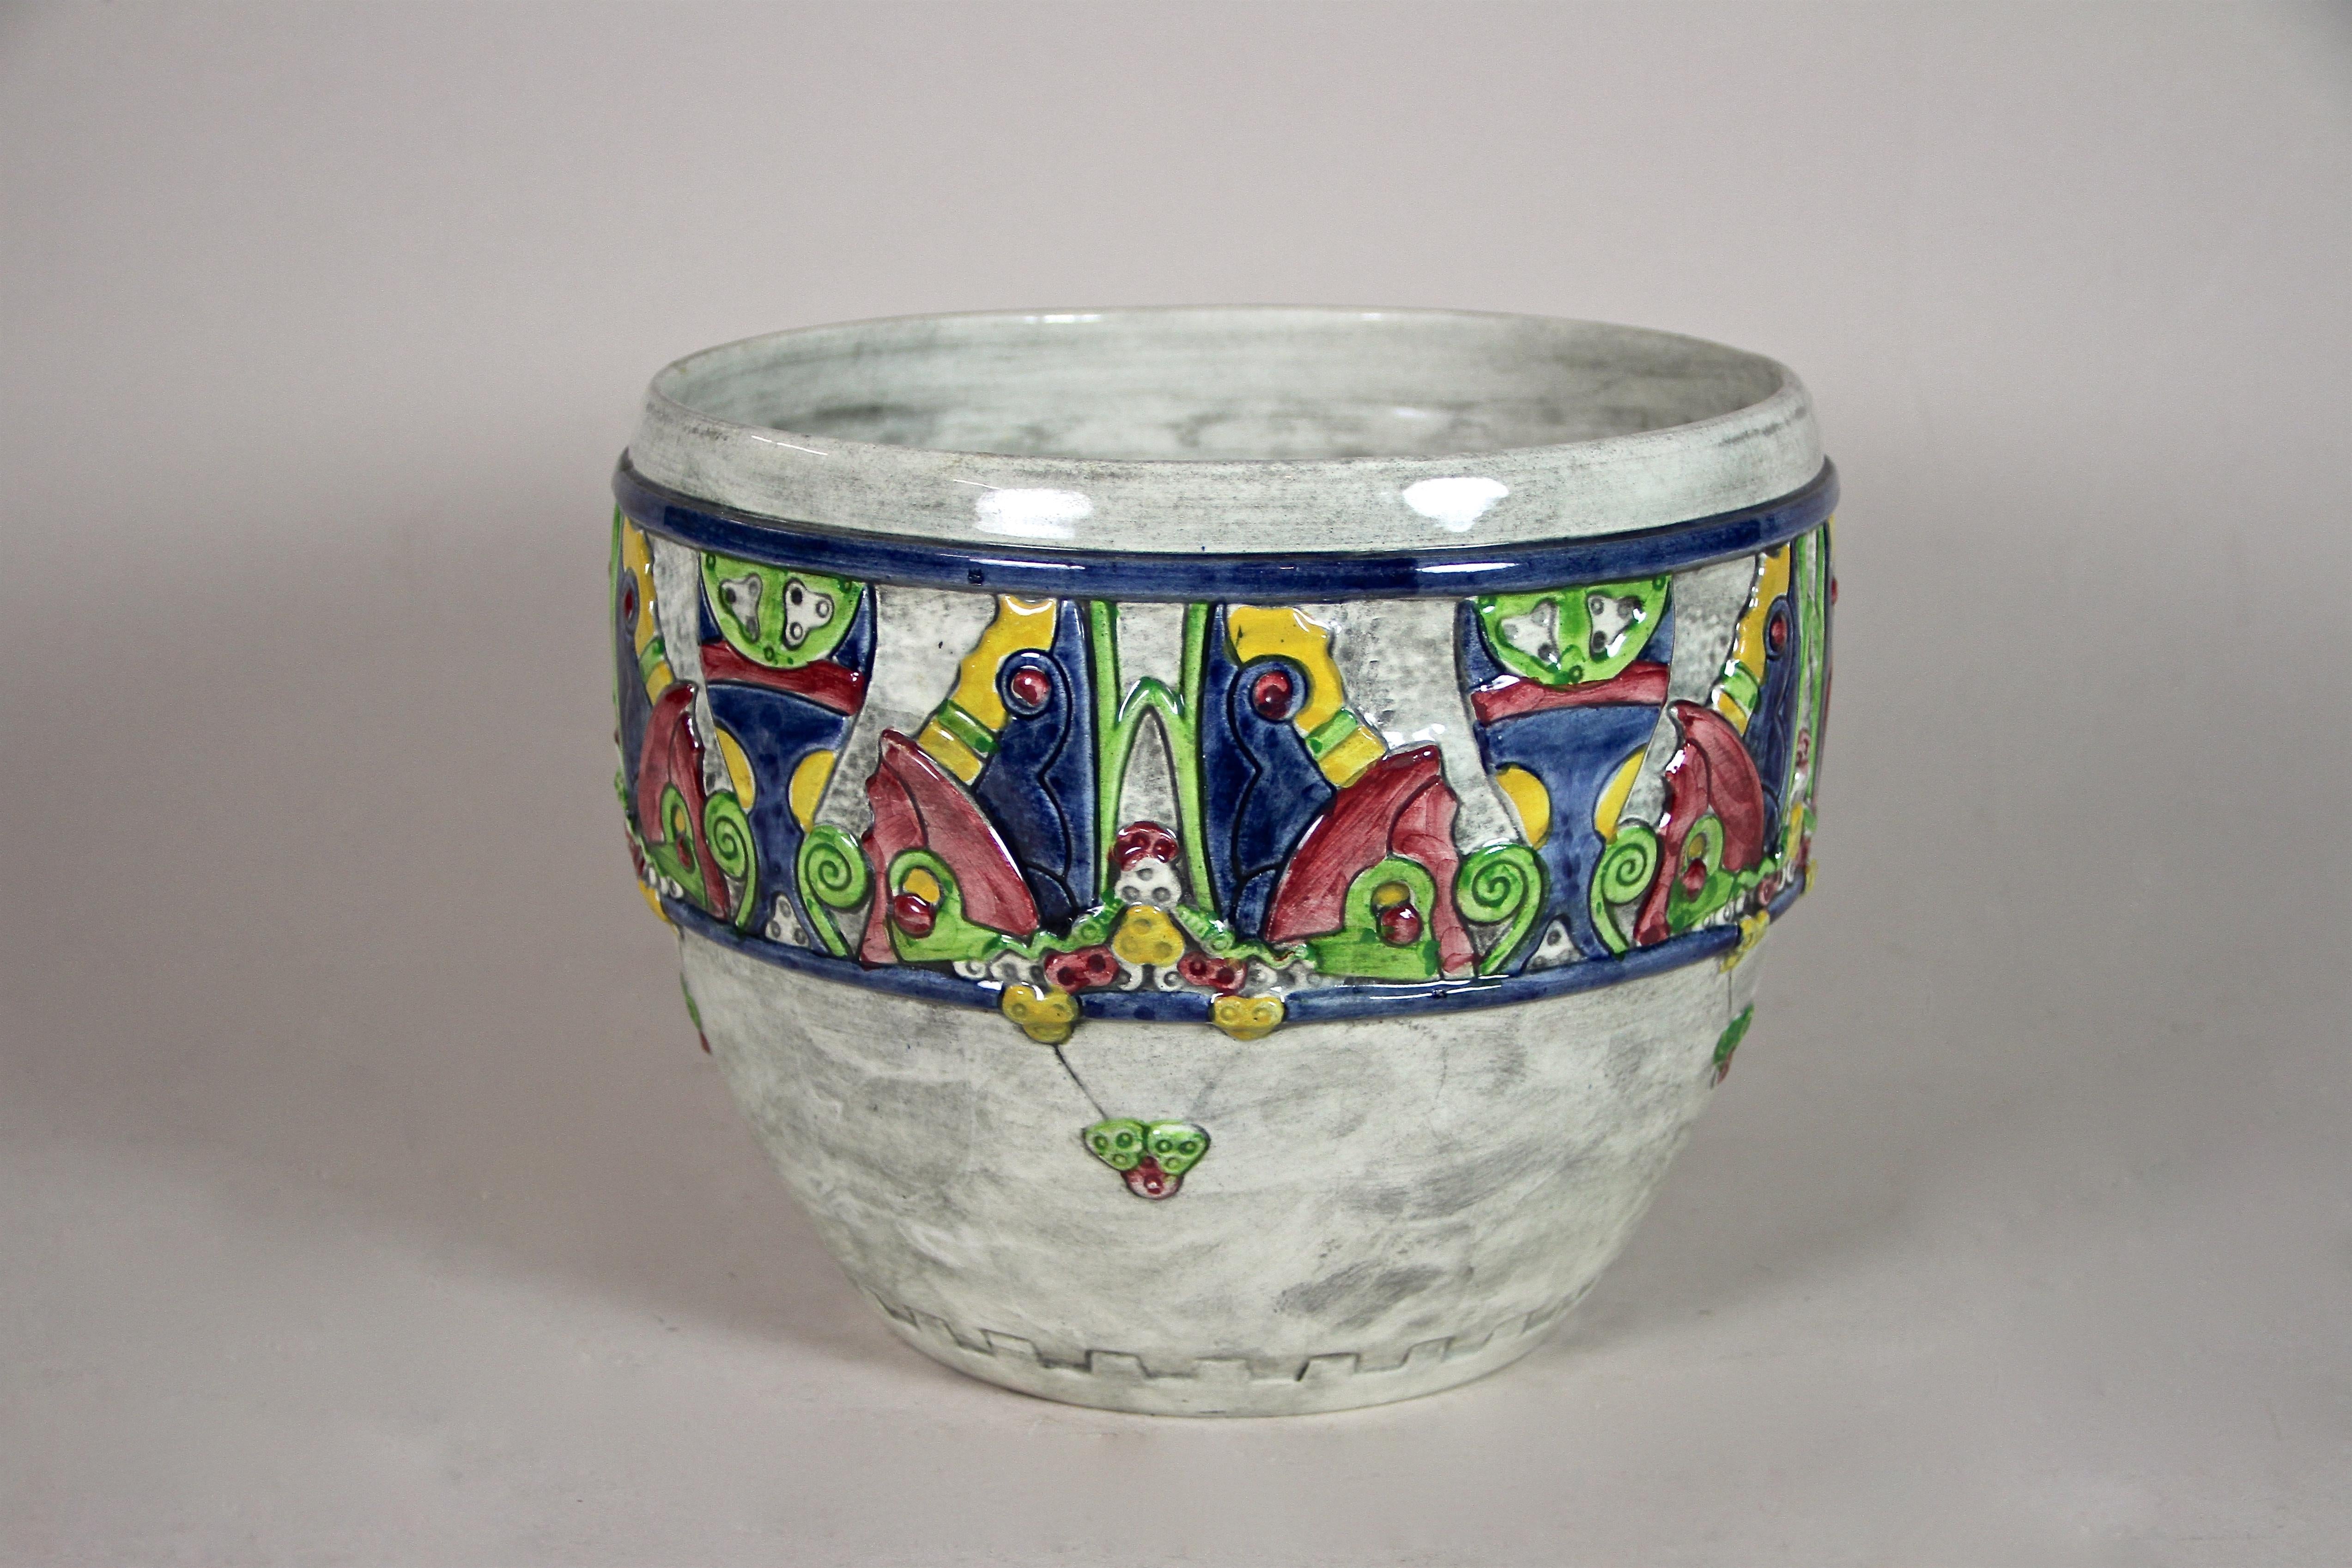 Fantastic Majolica cachepot or planter from the Art Nouveau period in Austria around 1910. Artfully made by the famous manufactory of Julius Dressler, this majolica cachepot shows an absolute memerizing 